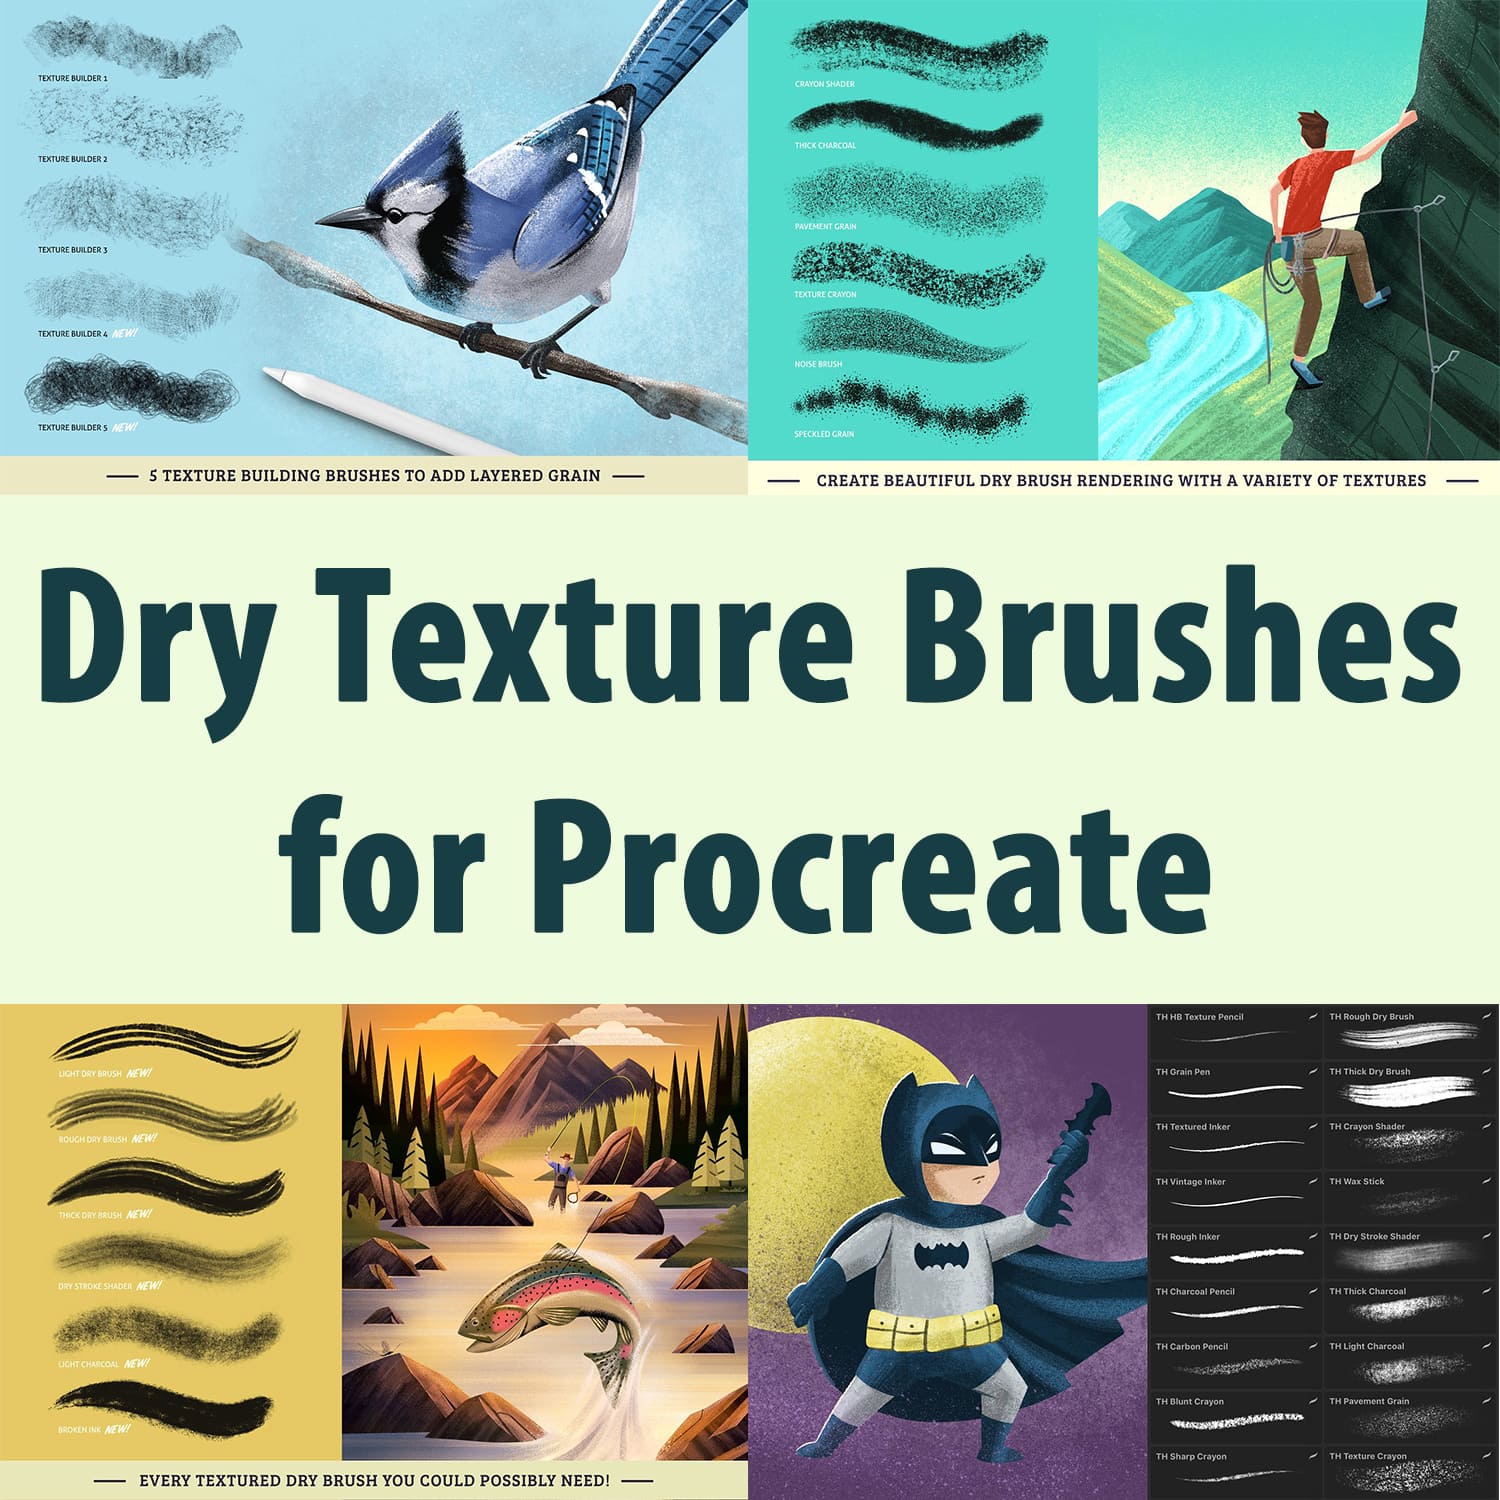 Dry Texture Brushes for Procreate.